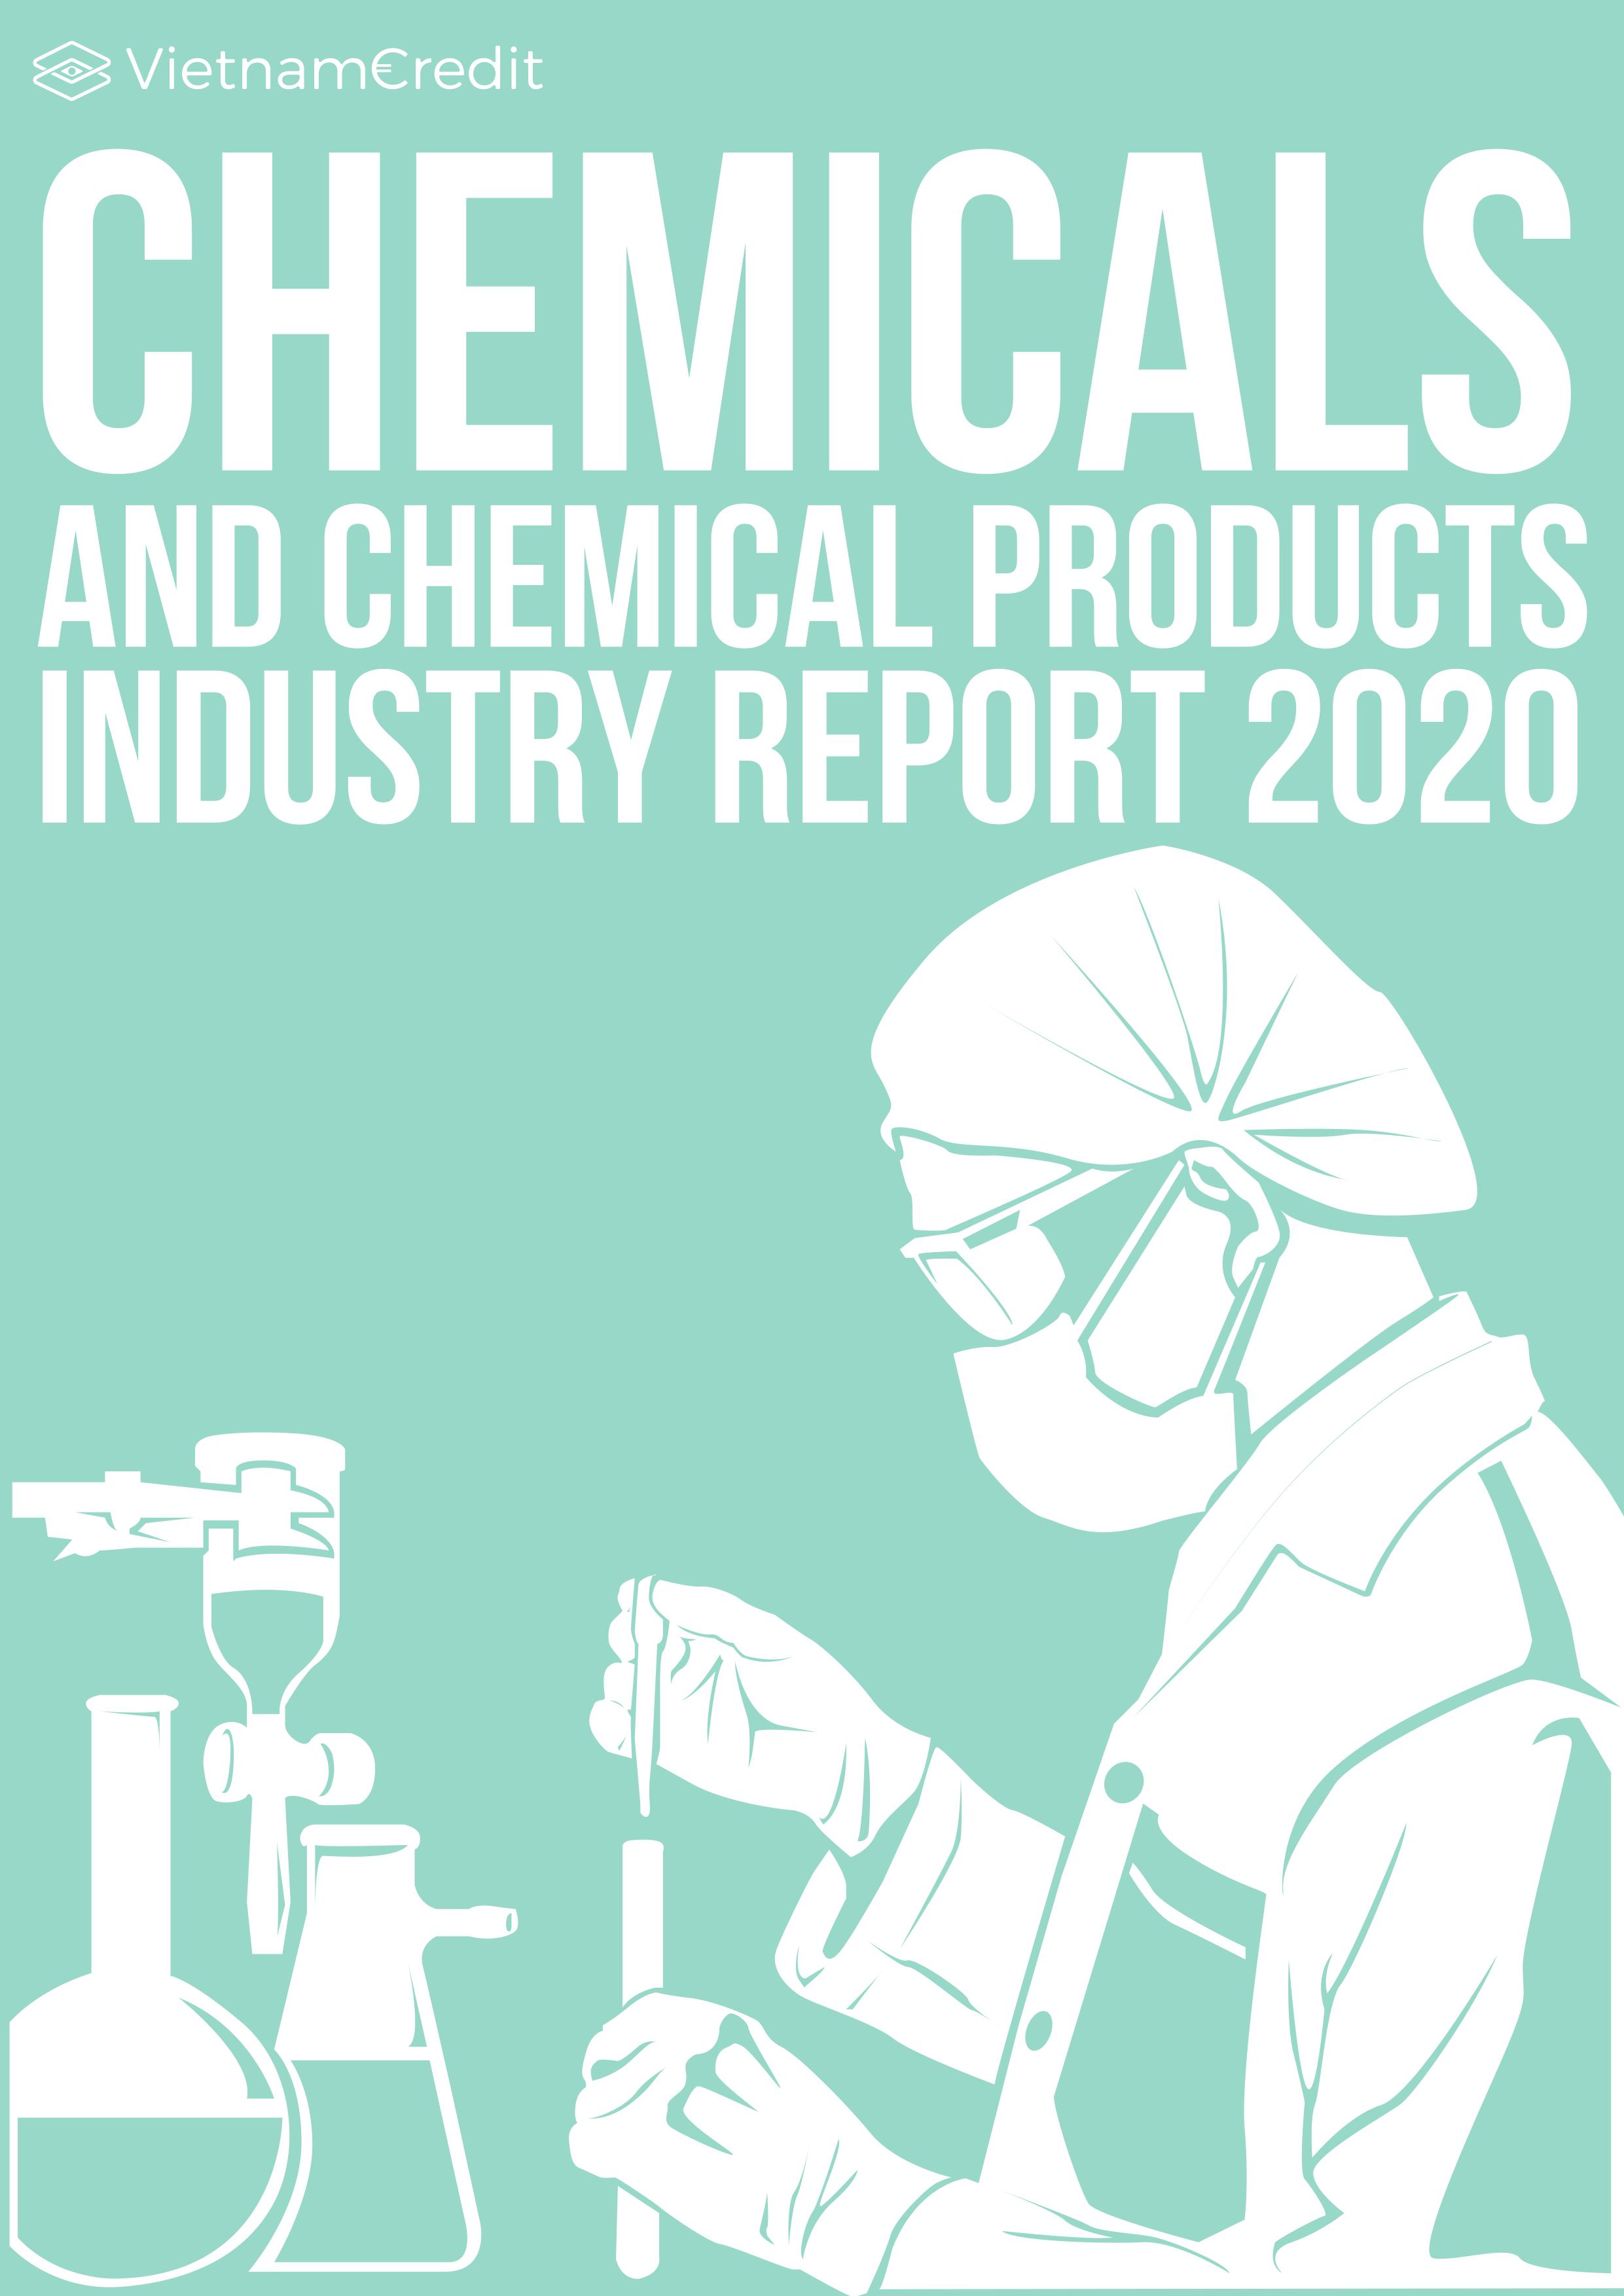 Vietnam Chemicals and Chemical Products Industry Report 2020